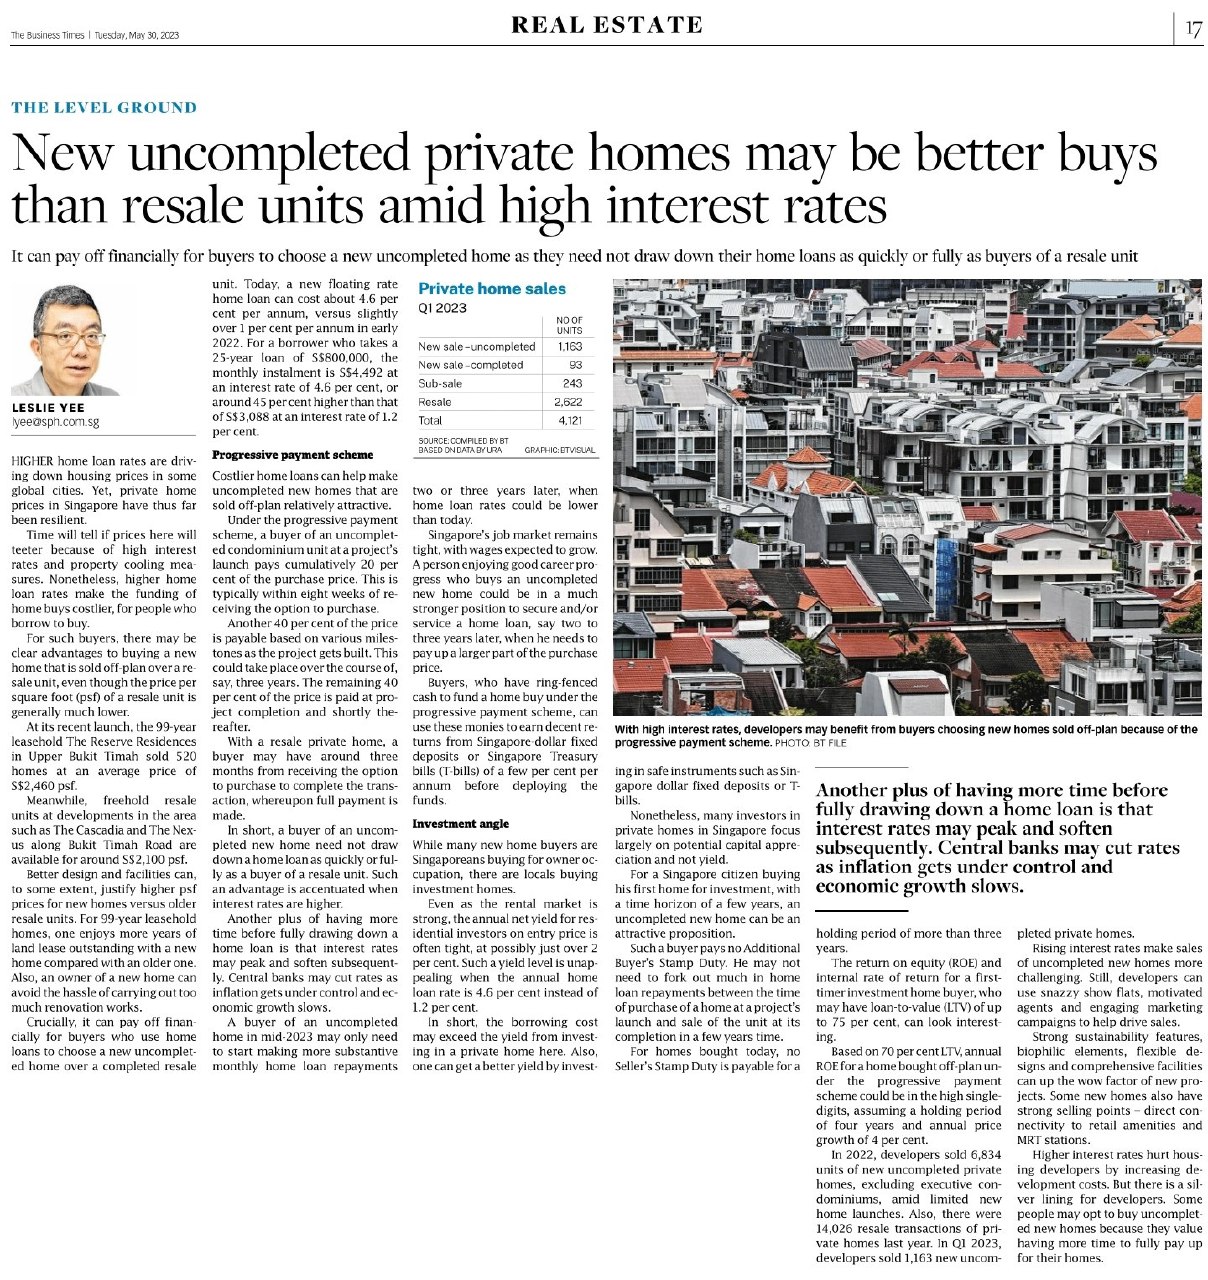 tembusu-grand-new-uncompleted-private-homes-may-be-better-buys-than-resale-units-amid-high-interest-rates-singapore